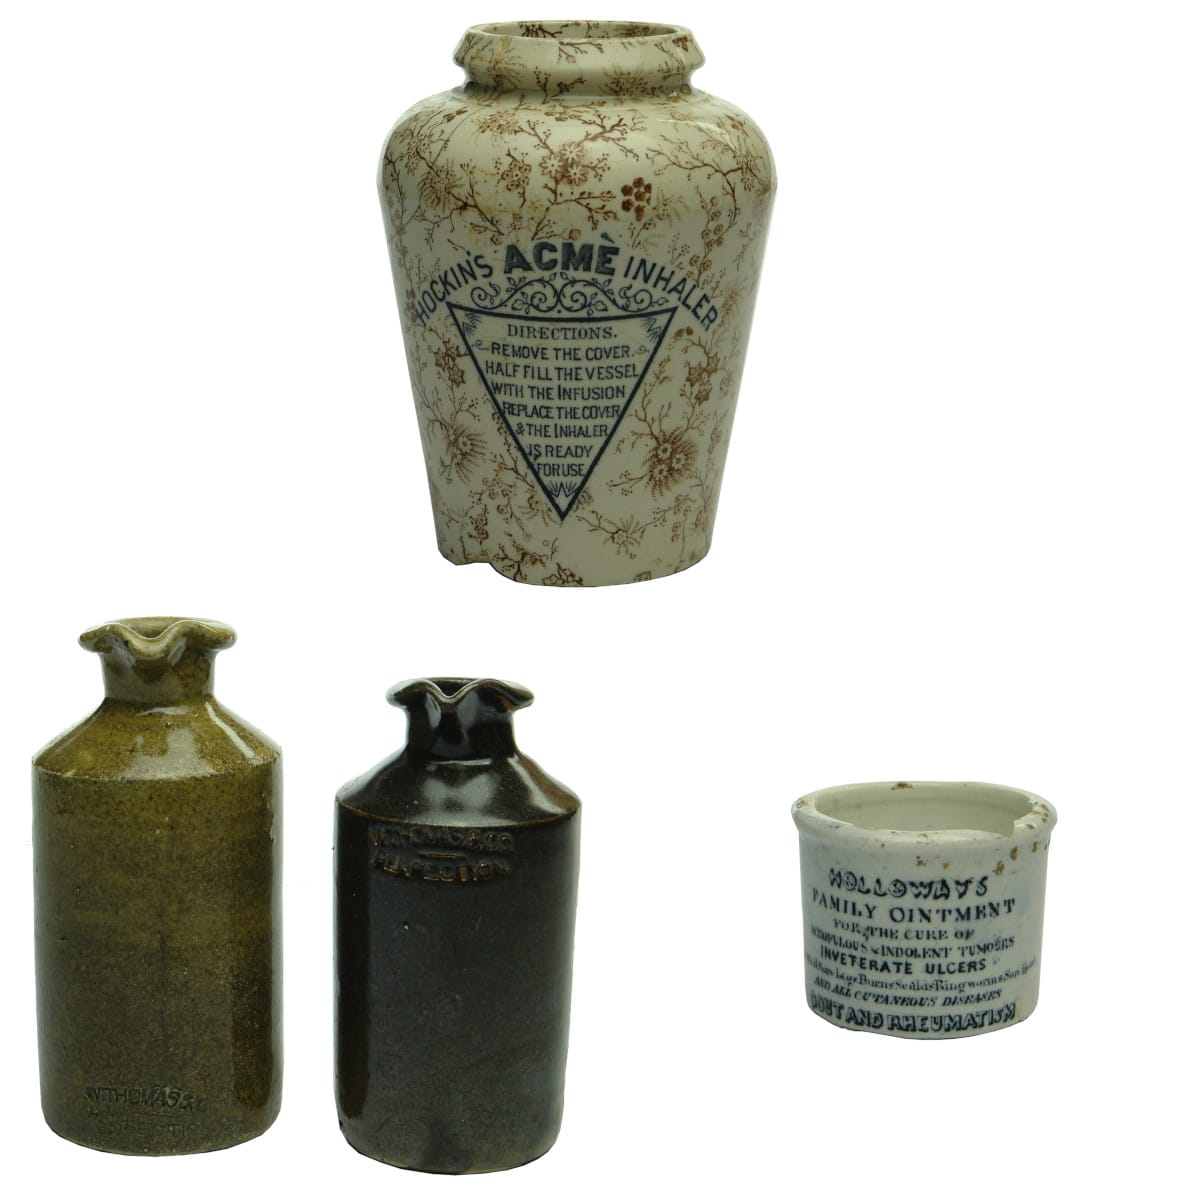 4 pottery items. Hockins Inhaler; 2 x different W. Thomas & Co inks; Holloway's Family Ointment pot.